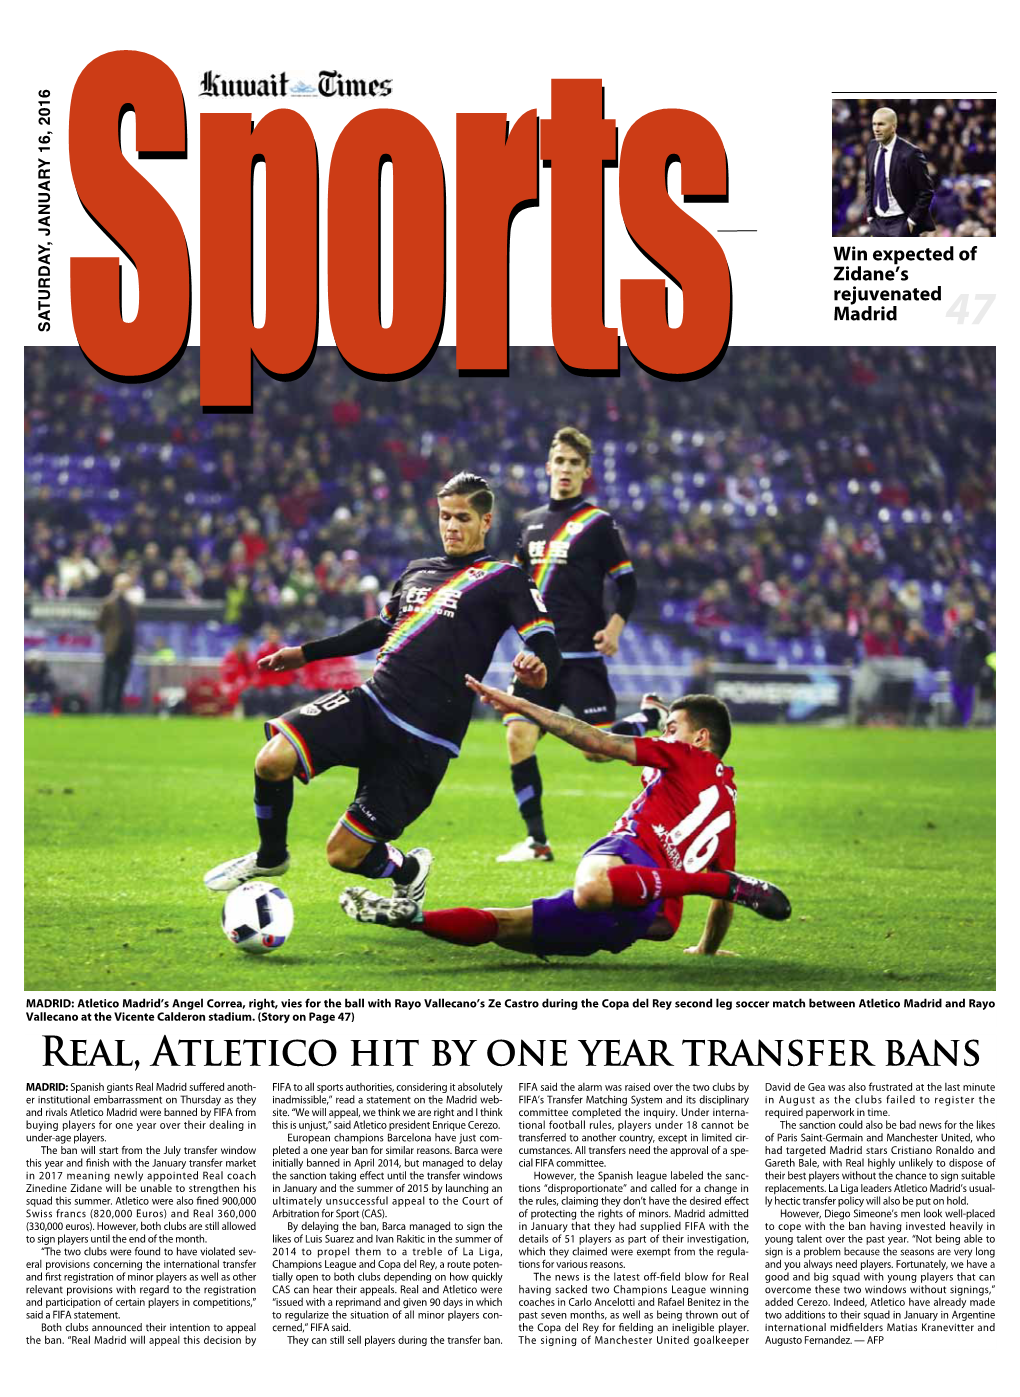 Real, Atletico Hit by One Year Transfer Bans